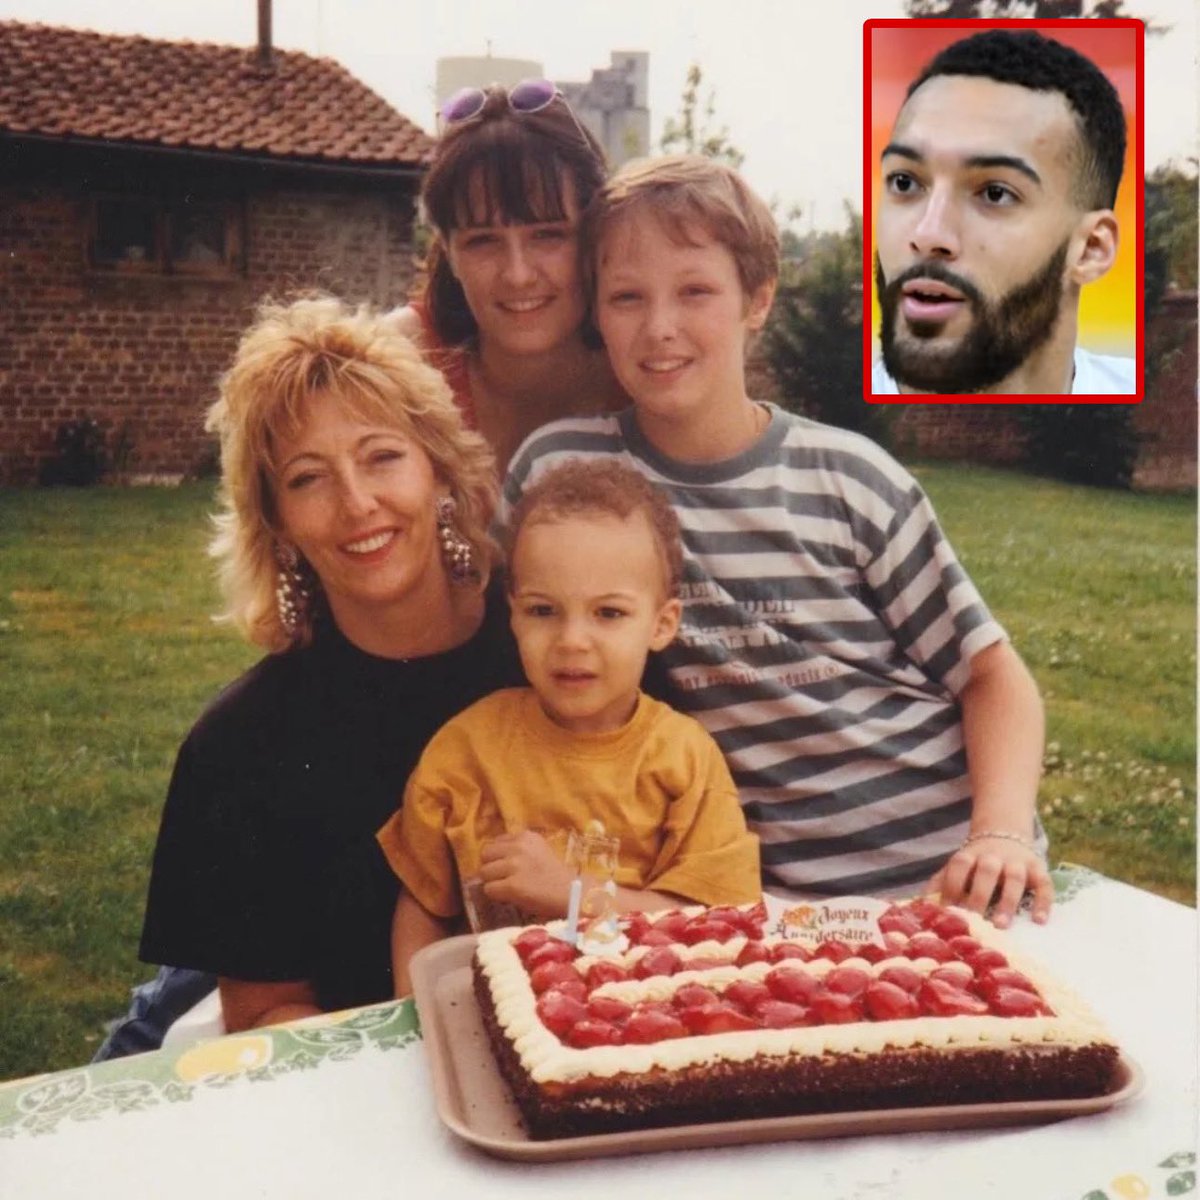 Rudy Gobert reveals that his family on his mother's side did not want him around because of his skin color “We don’t want that baby in our house.”